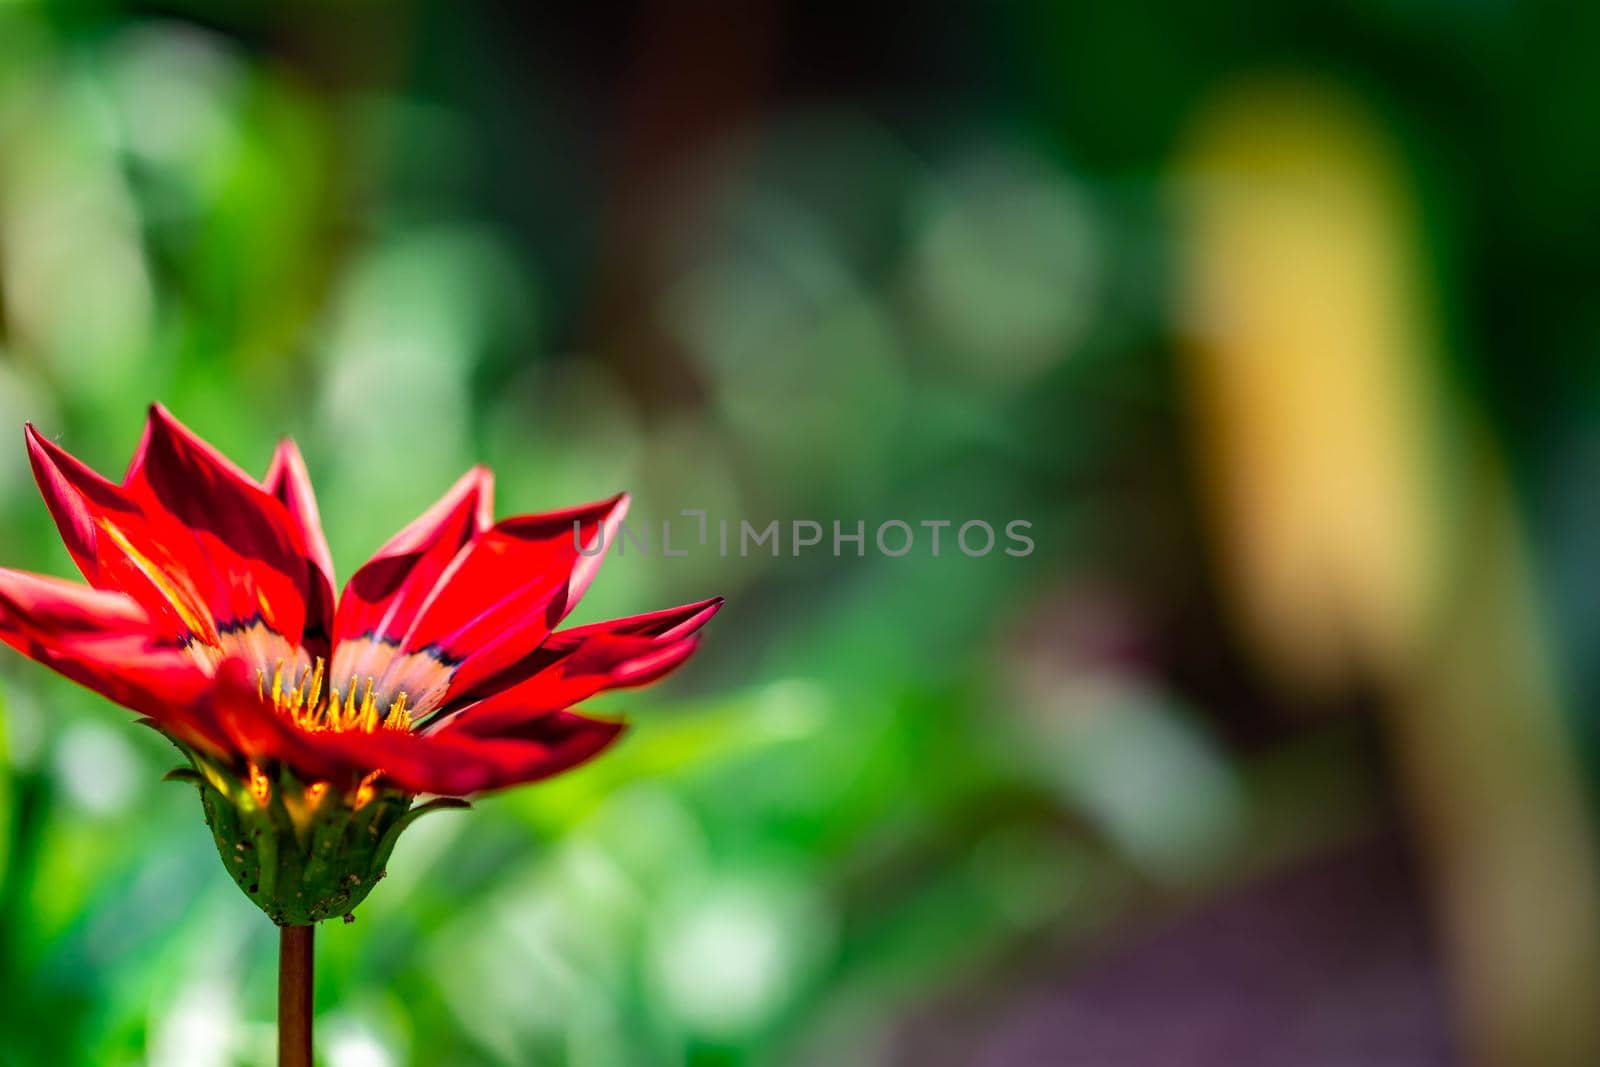 Horizontal full lenght blurry red flower with soft green background image with space for text and message